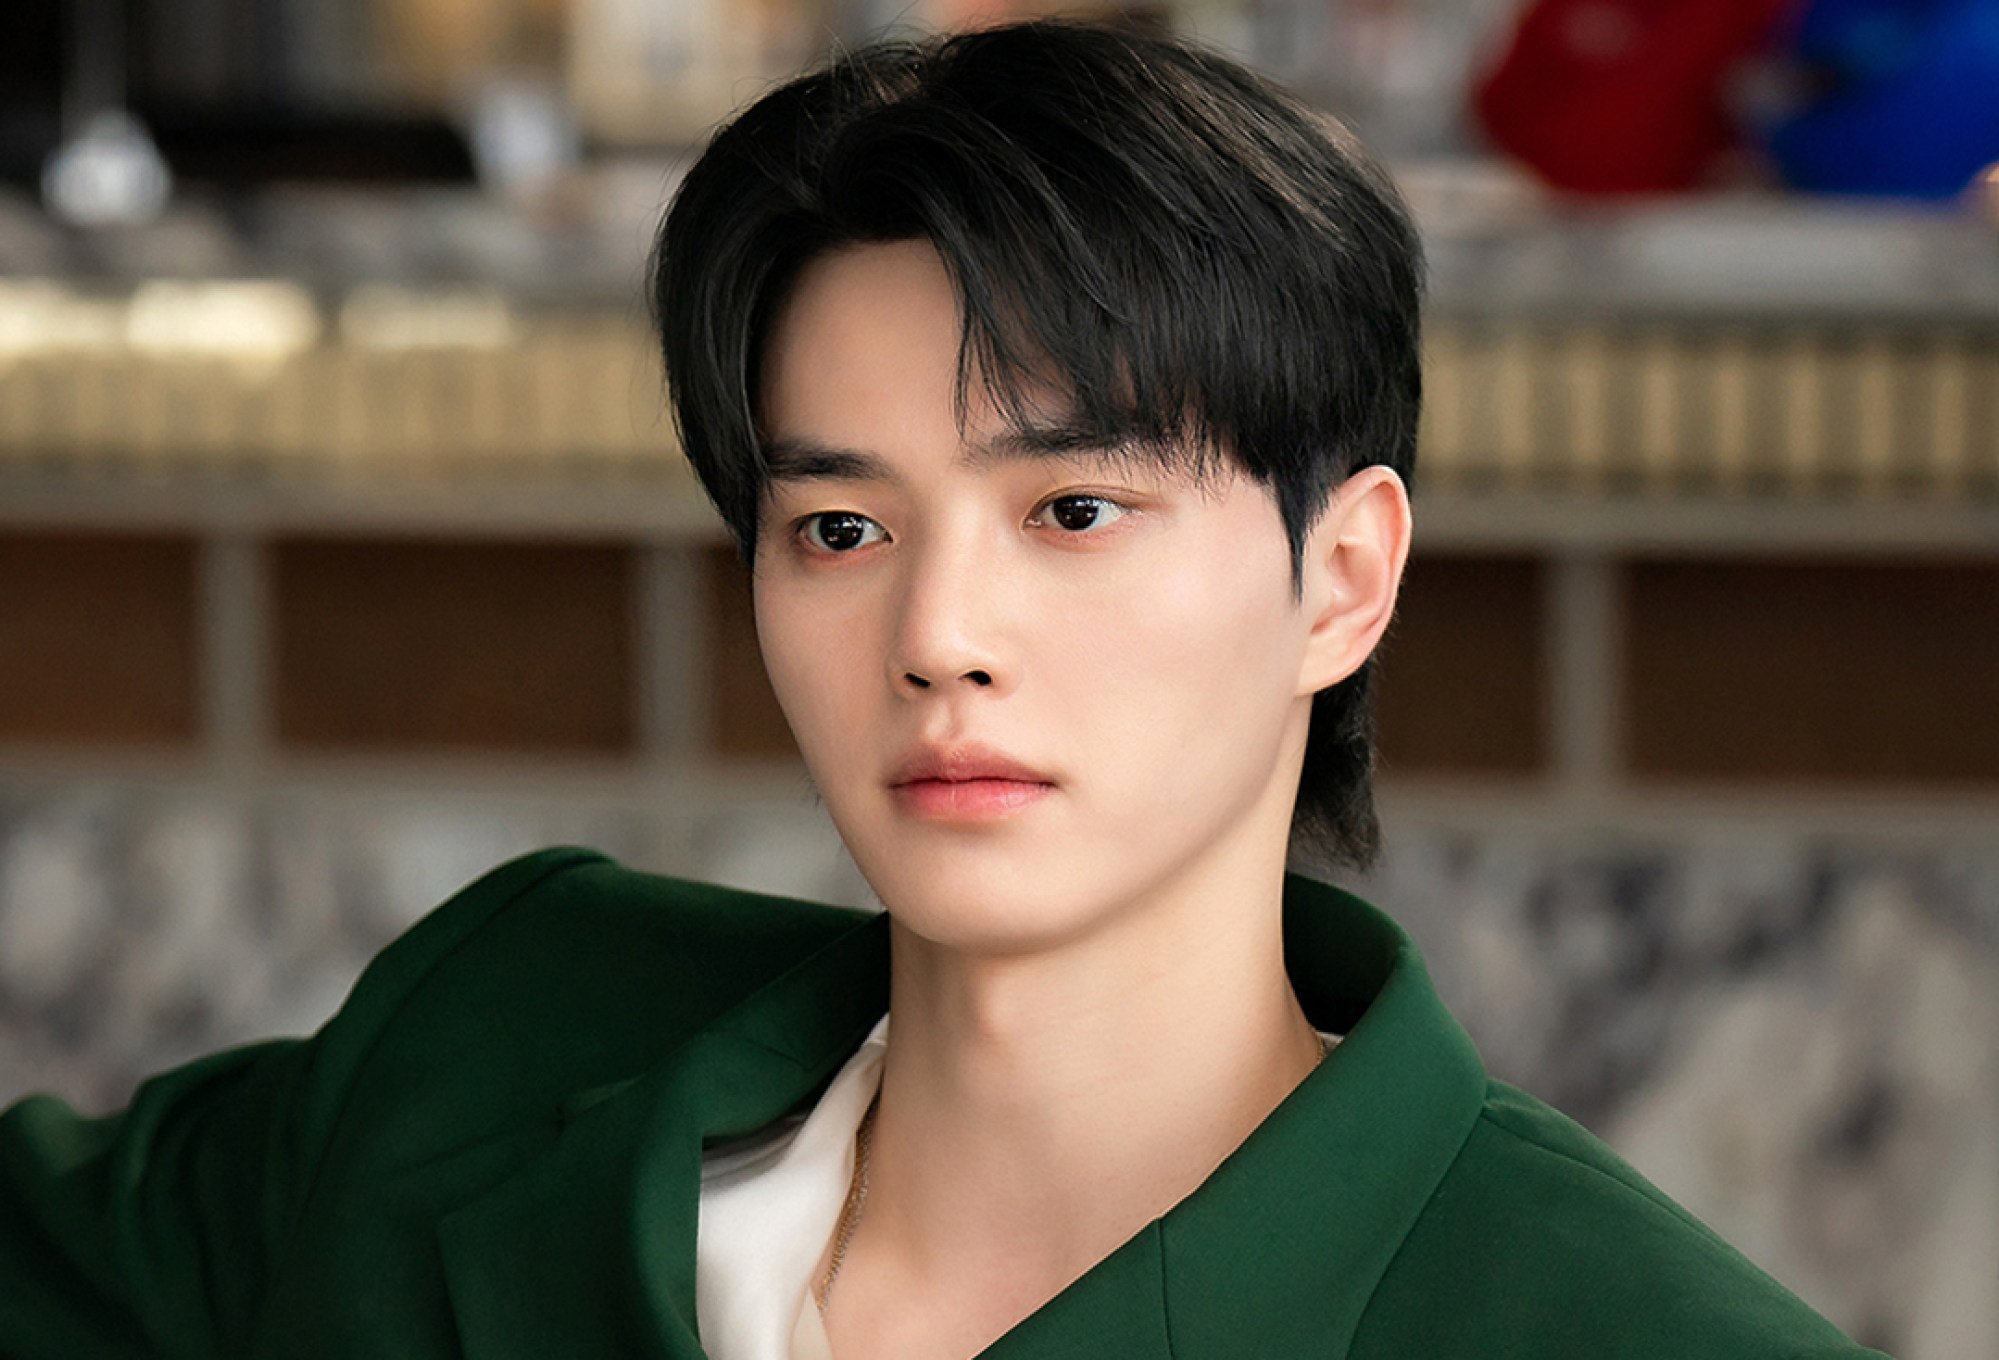 Netflix K-drama review: Sweet Home season 2 – Song Kang leads overblown  follow-up to hit monster series that forgets what seduced us in the first  place